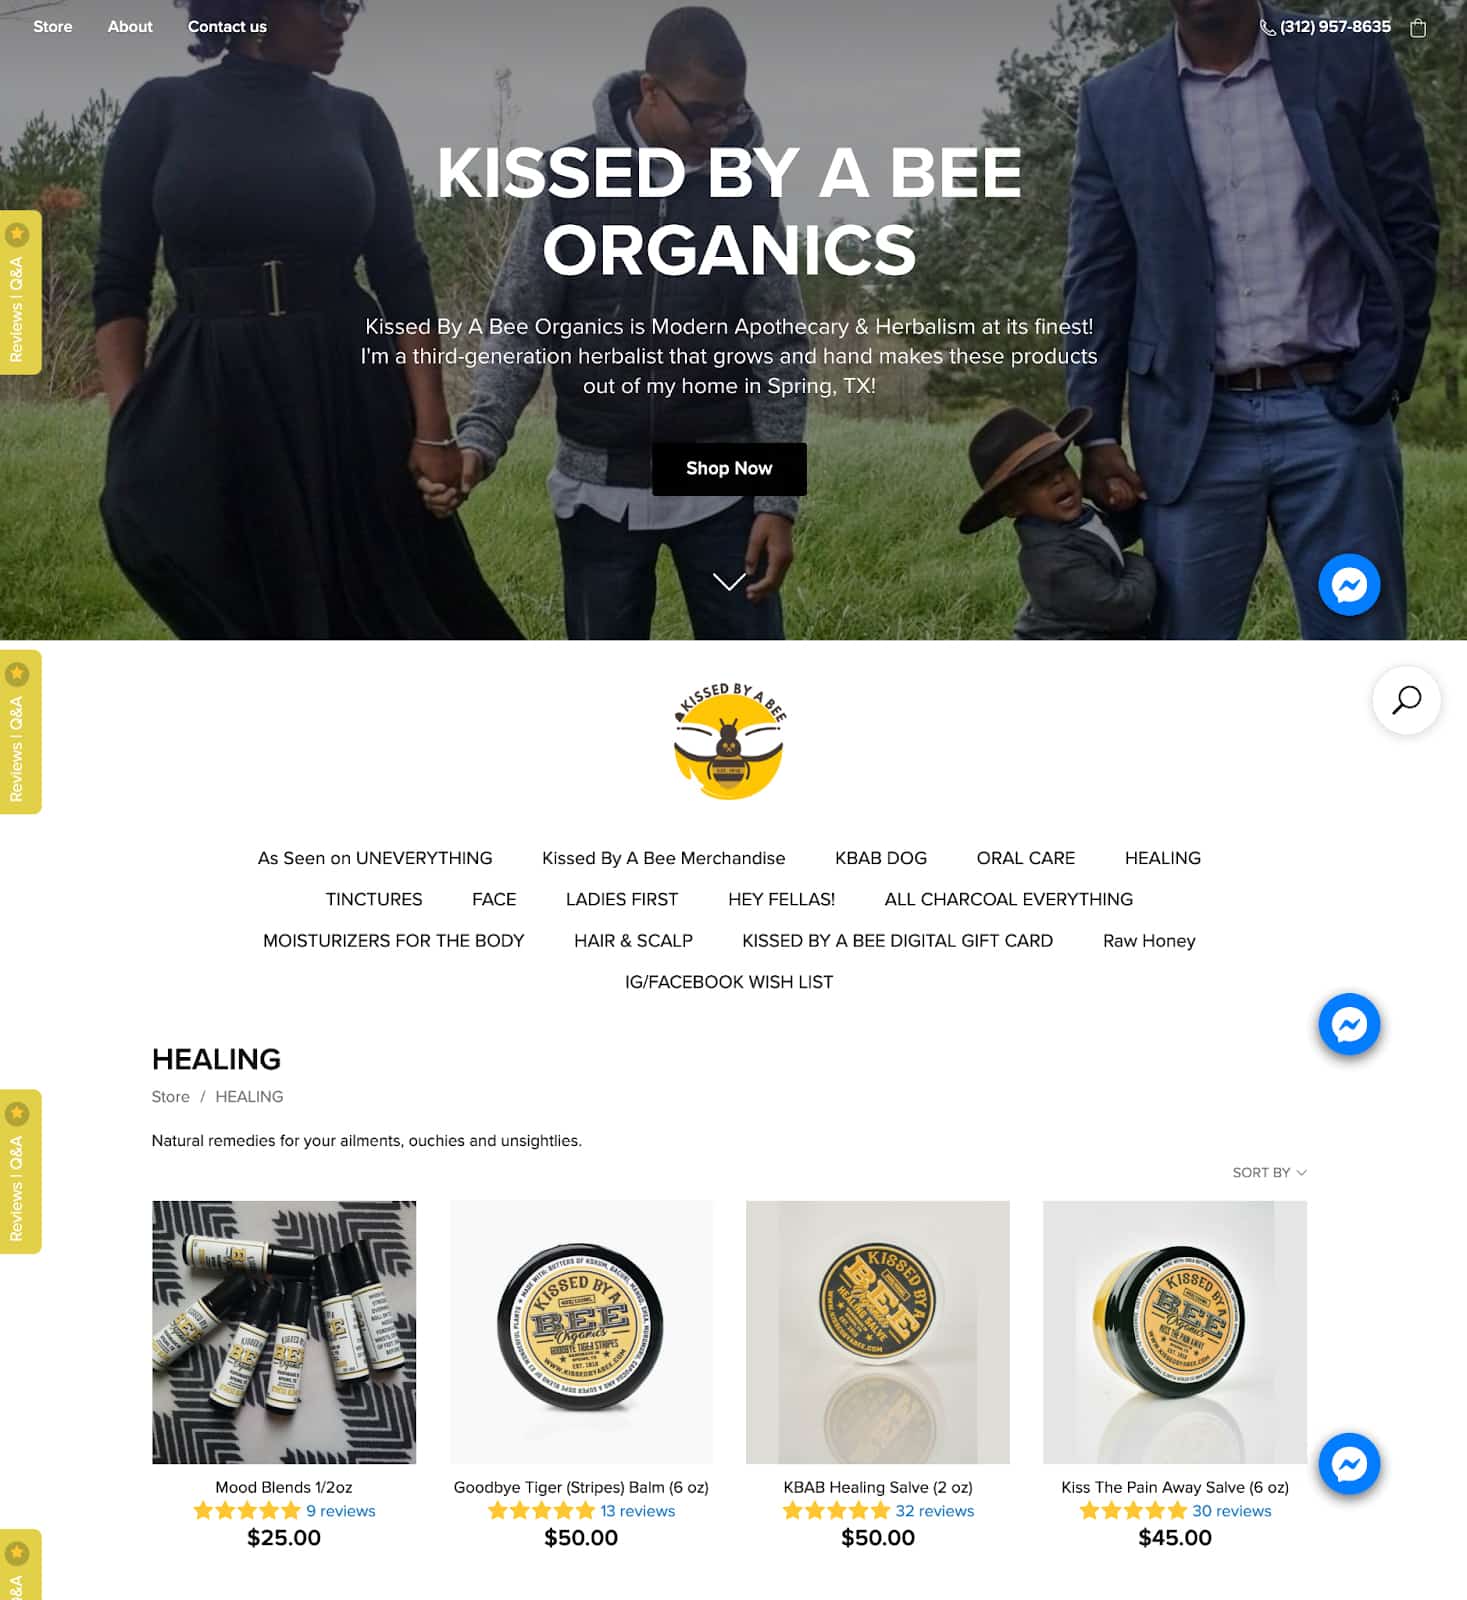 Kissed by a Bee online store.